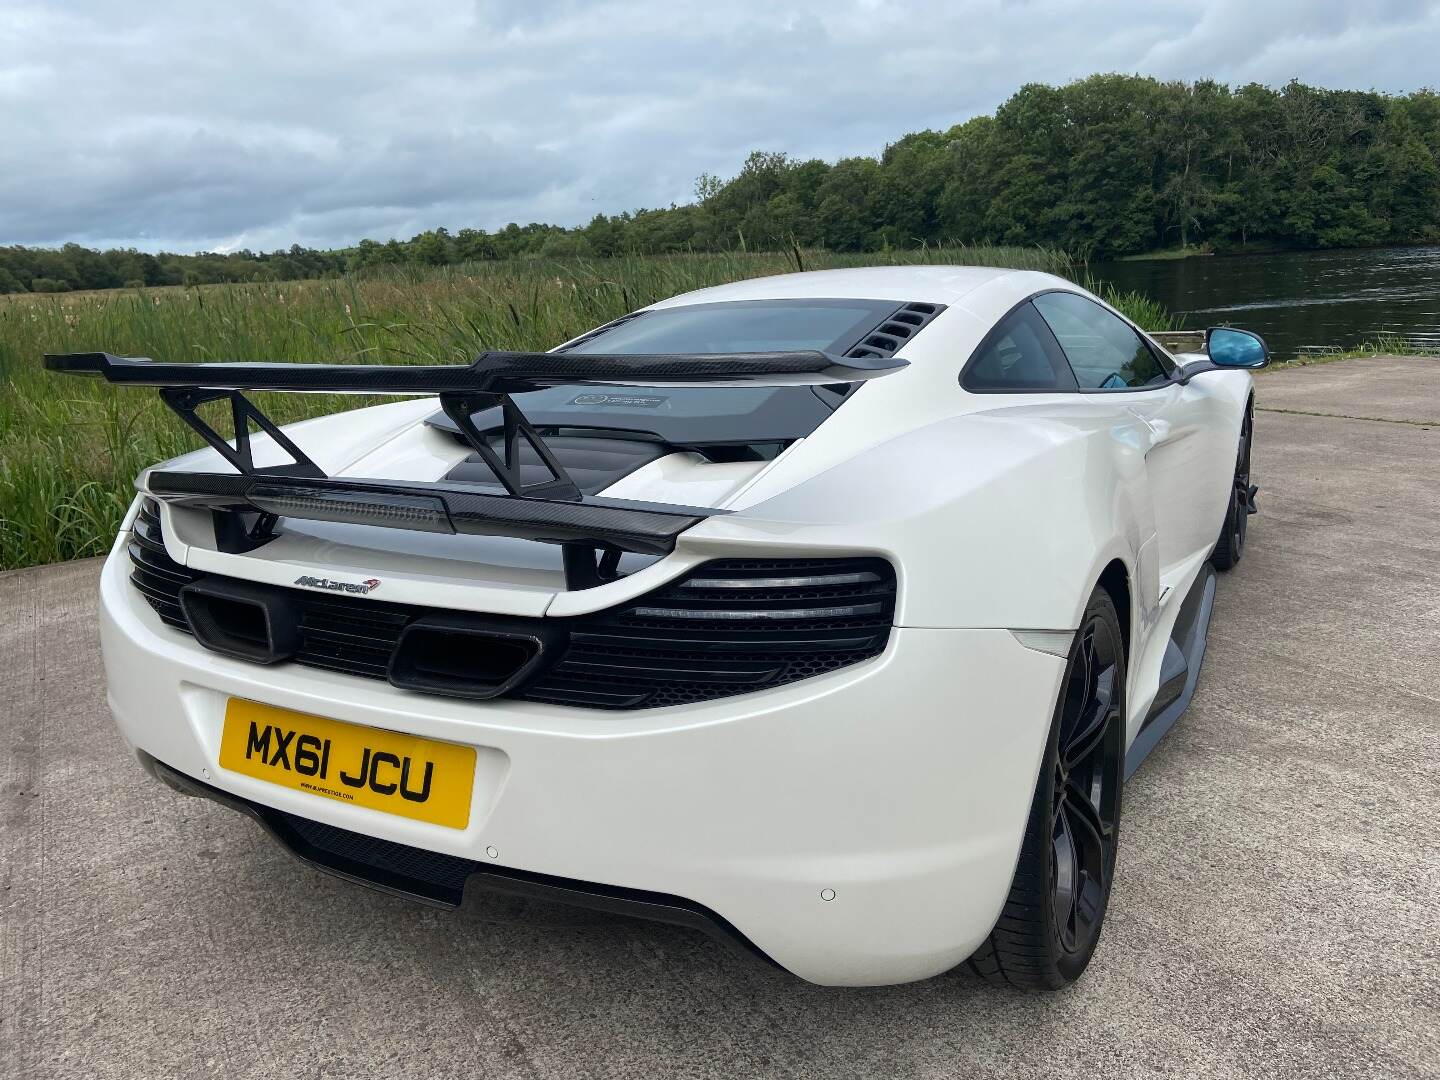 McLaren MP4 SPORTS COUPE in Tyrone